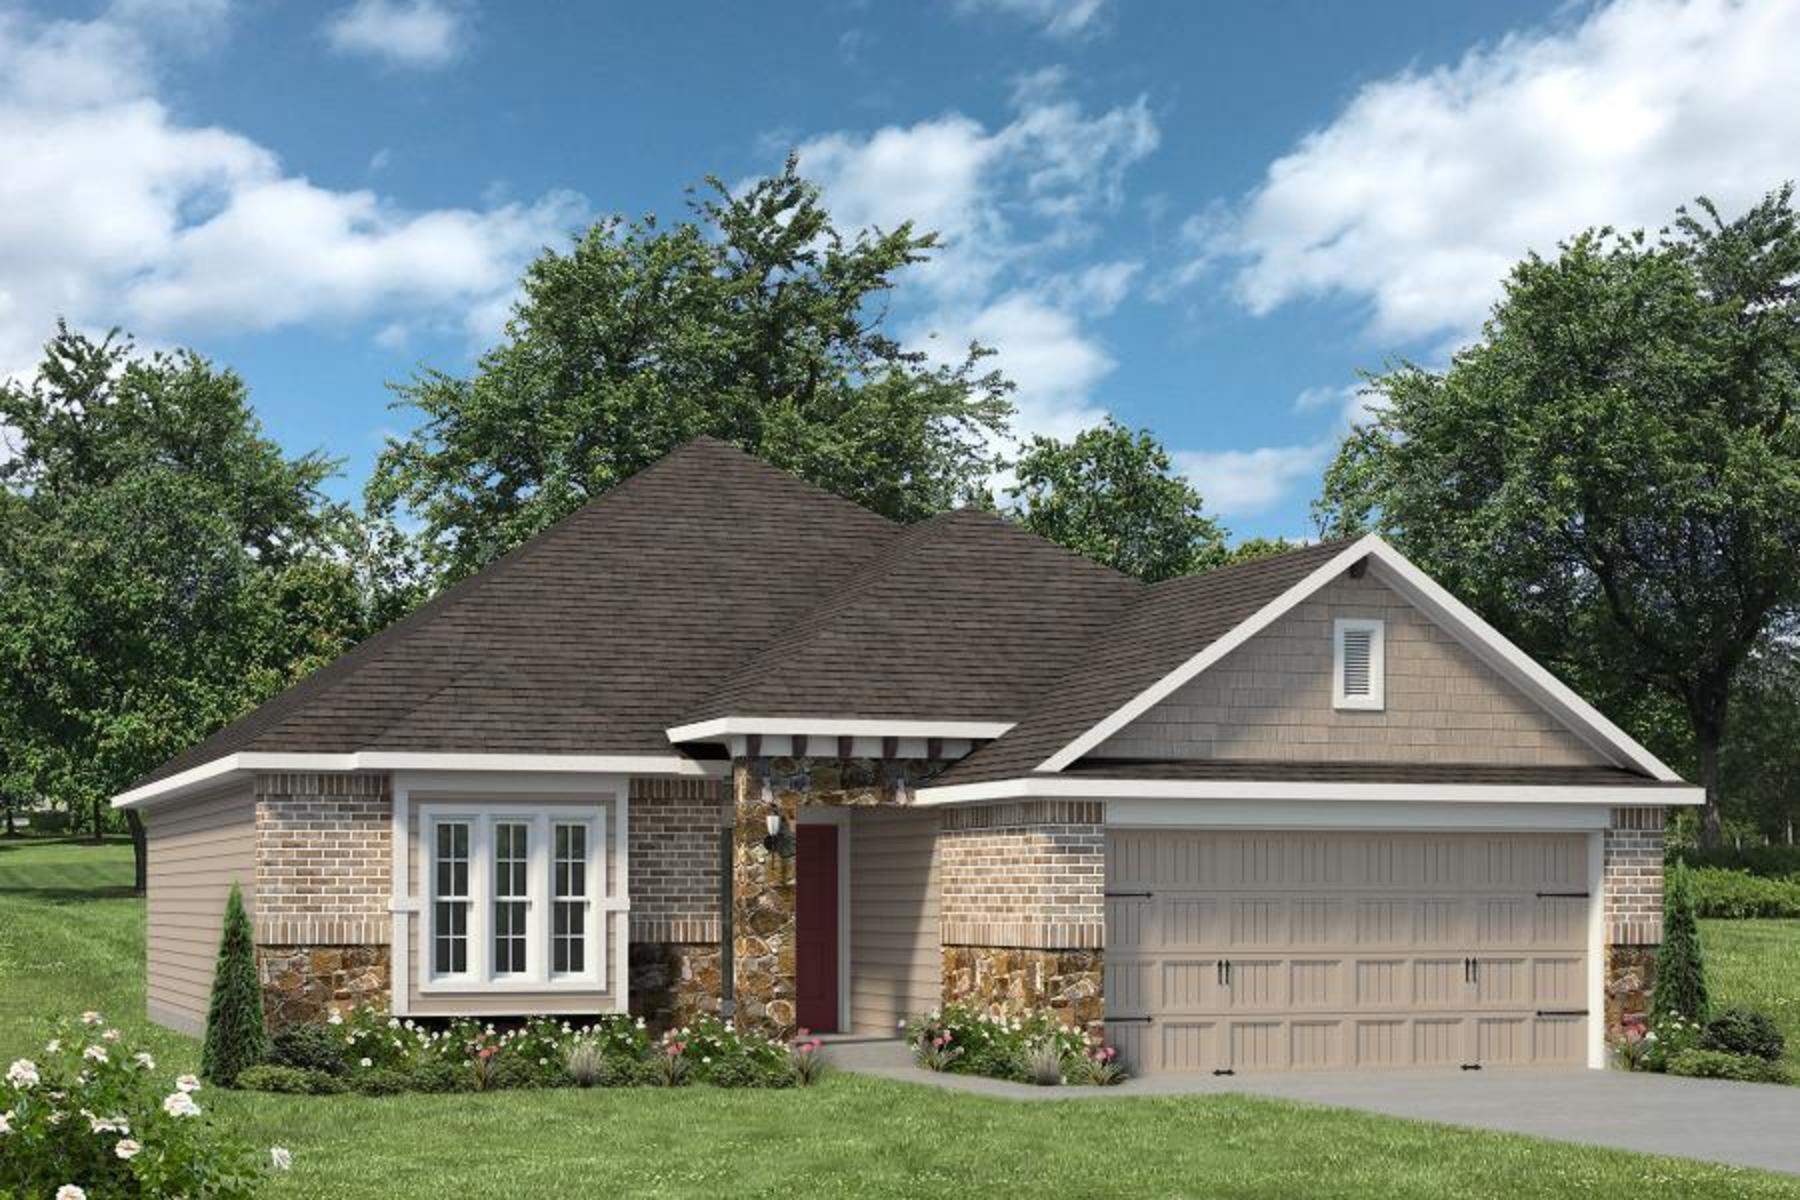 https://myhome.anewgo.com/client/stylecraft/community/Build%20On%20Your%20Lot/plan/1613%20%7C%20Blakely%20Classic?elevId=54. Blakely Home with 3 Bedrooms